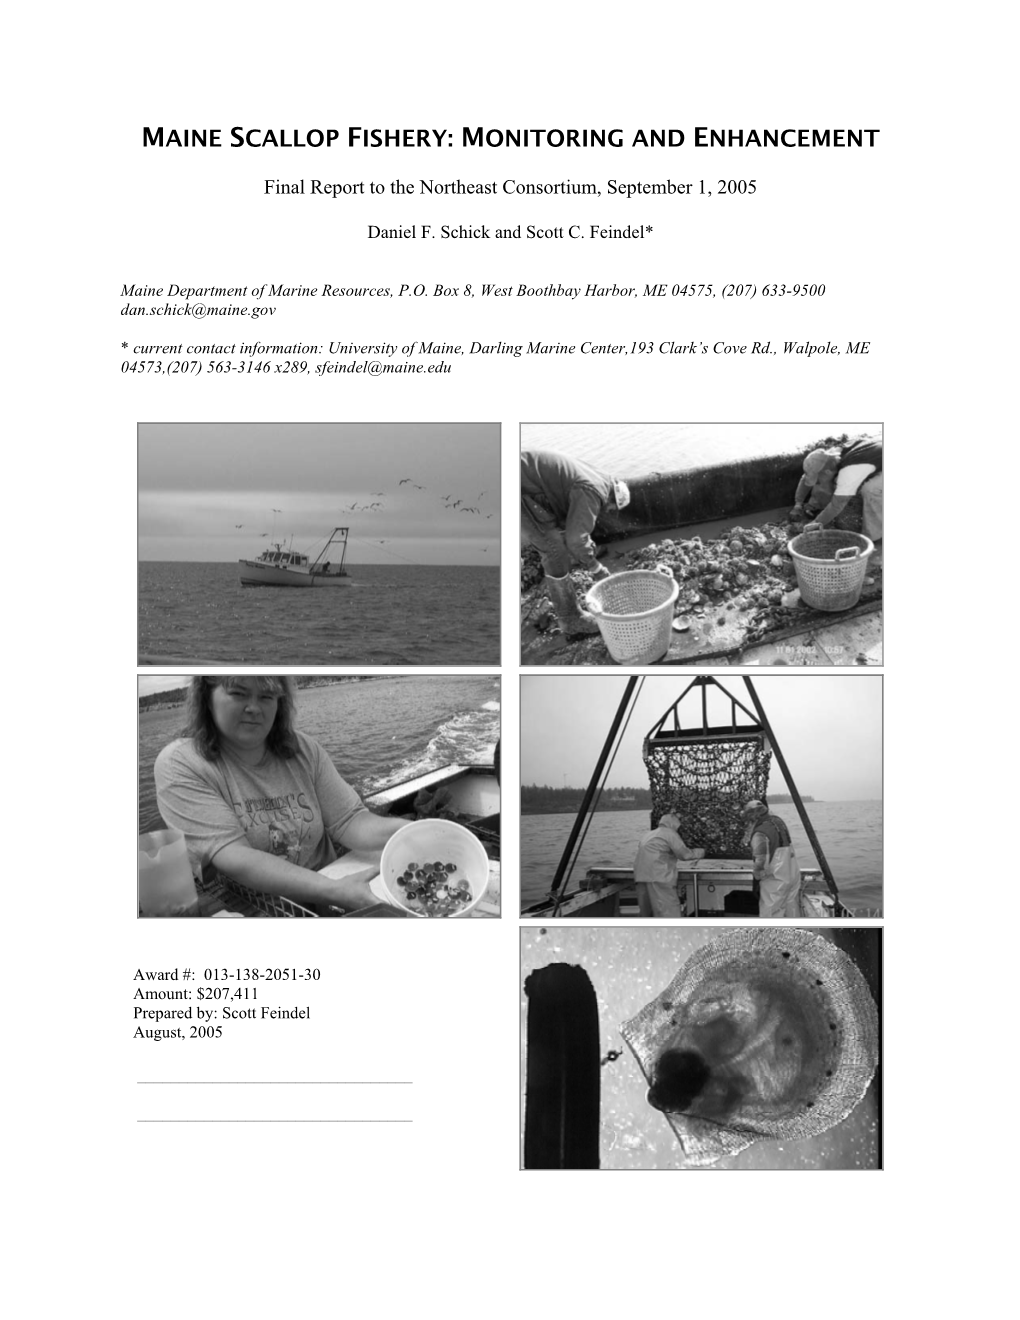 Maine Scallop Fishery: Monitoring and Enhancement